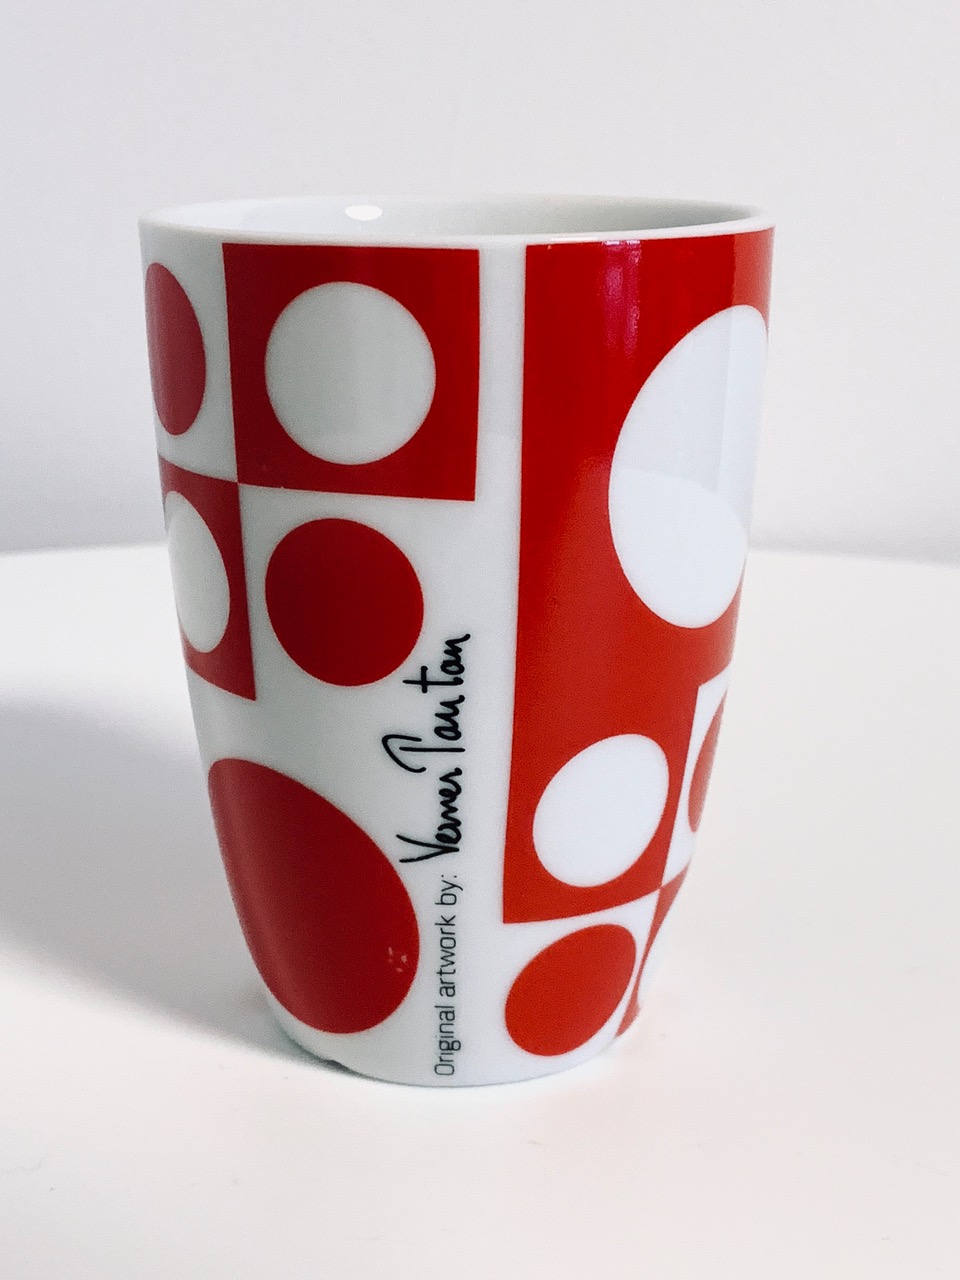 Image of the Verner Panton Menu cup red 210 ml offered in this advertisement.